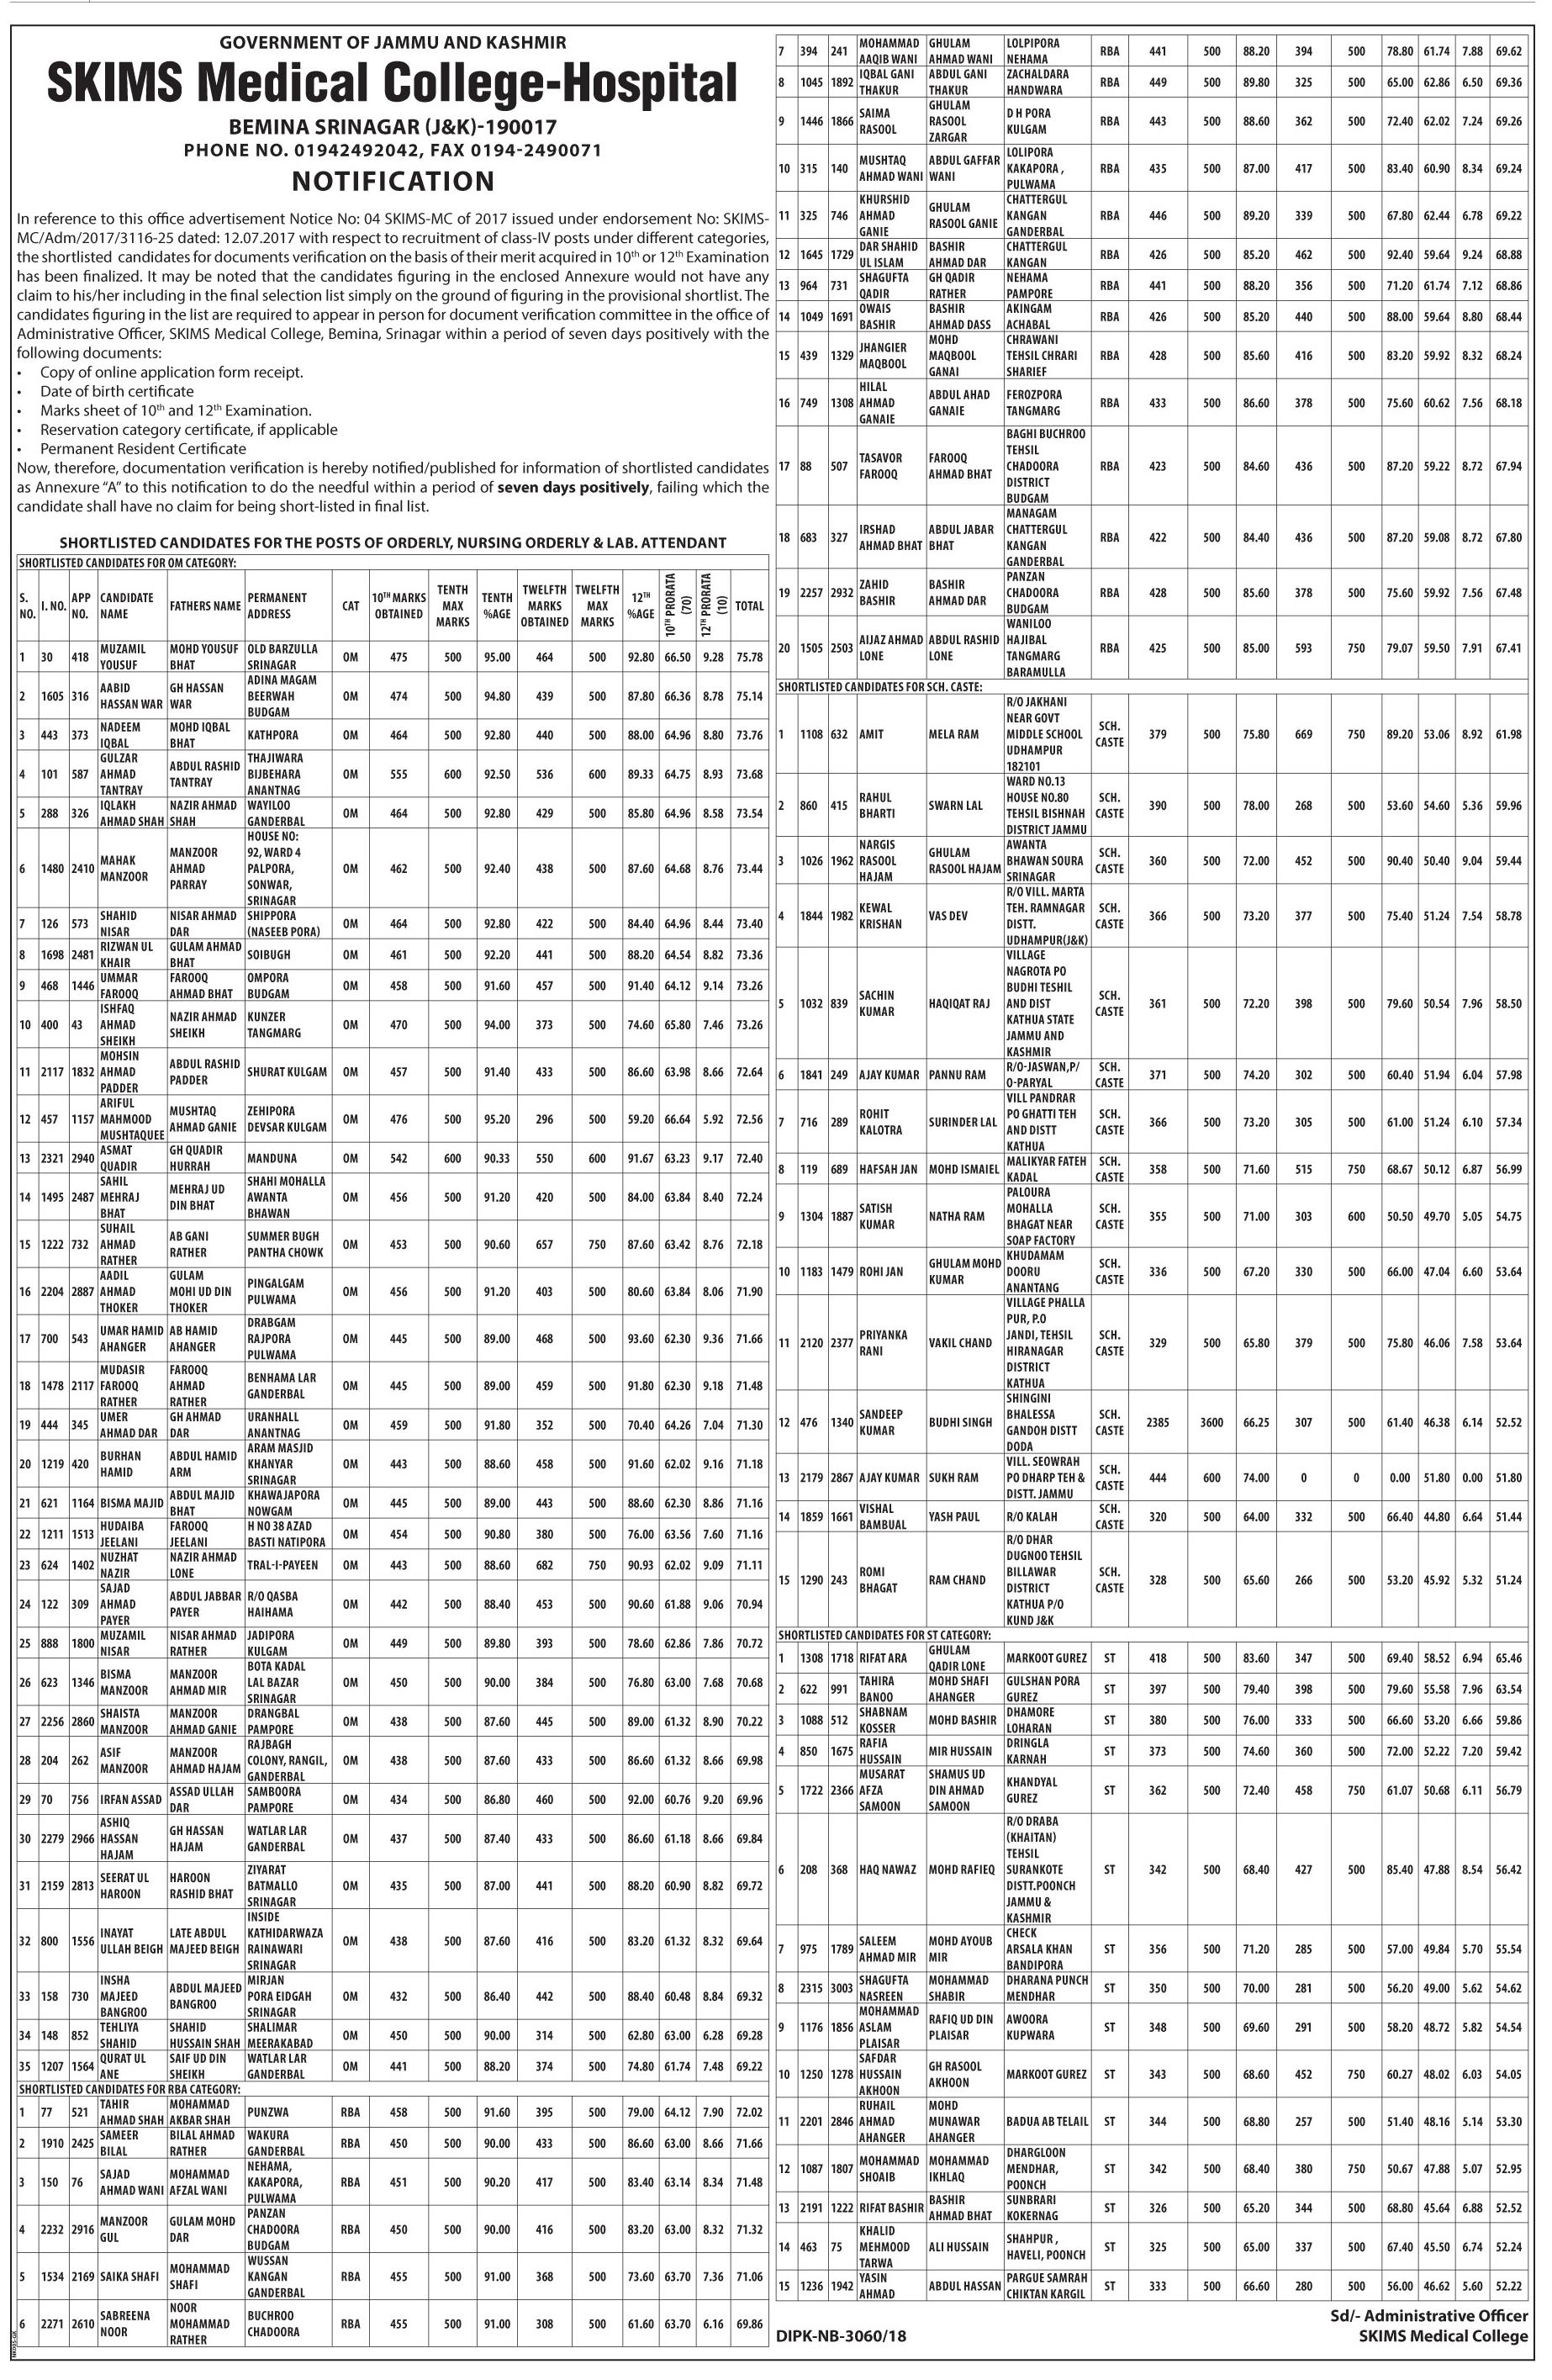 hortlisted candidates for orderly, Nursing orderly, Lab Attendant